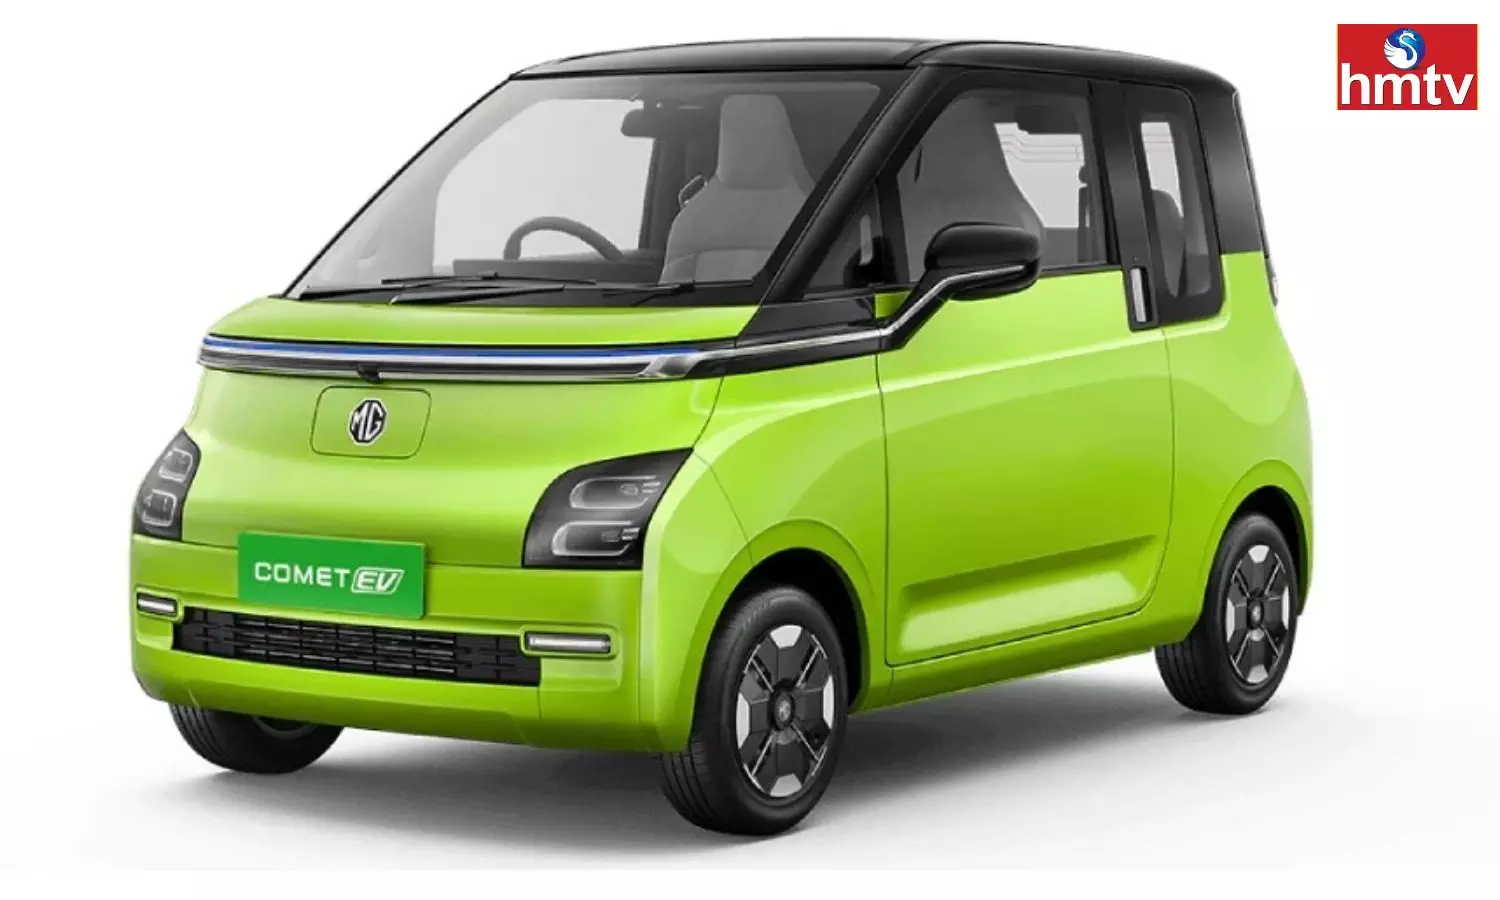 MG Comet EV Becomes the Most Affordable Electric Car In the Indian Market